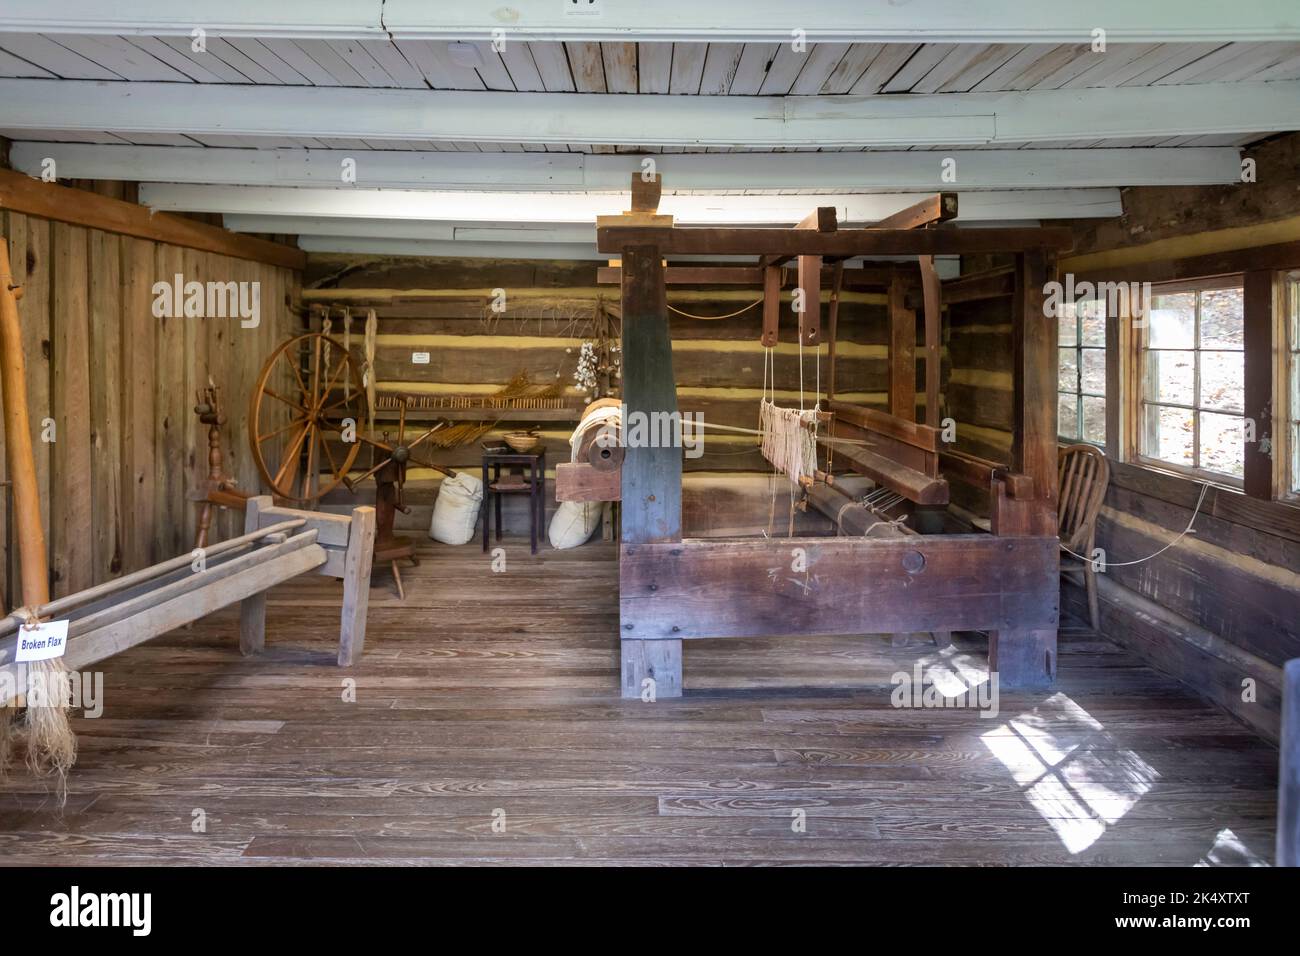 Beckley, West Virginia - A weaver's shed in the Mountain Homestead, an Appalachian frontier settlement that recreates how mountain settlers lived from Stock Photo